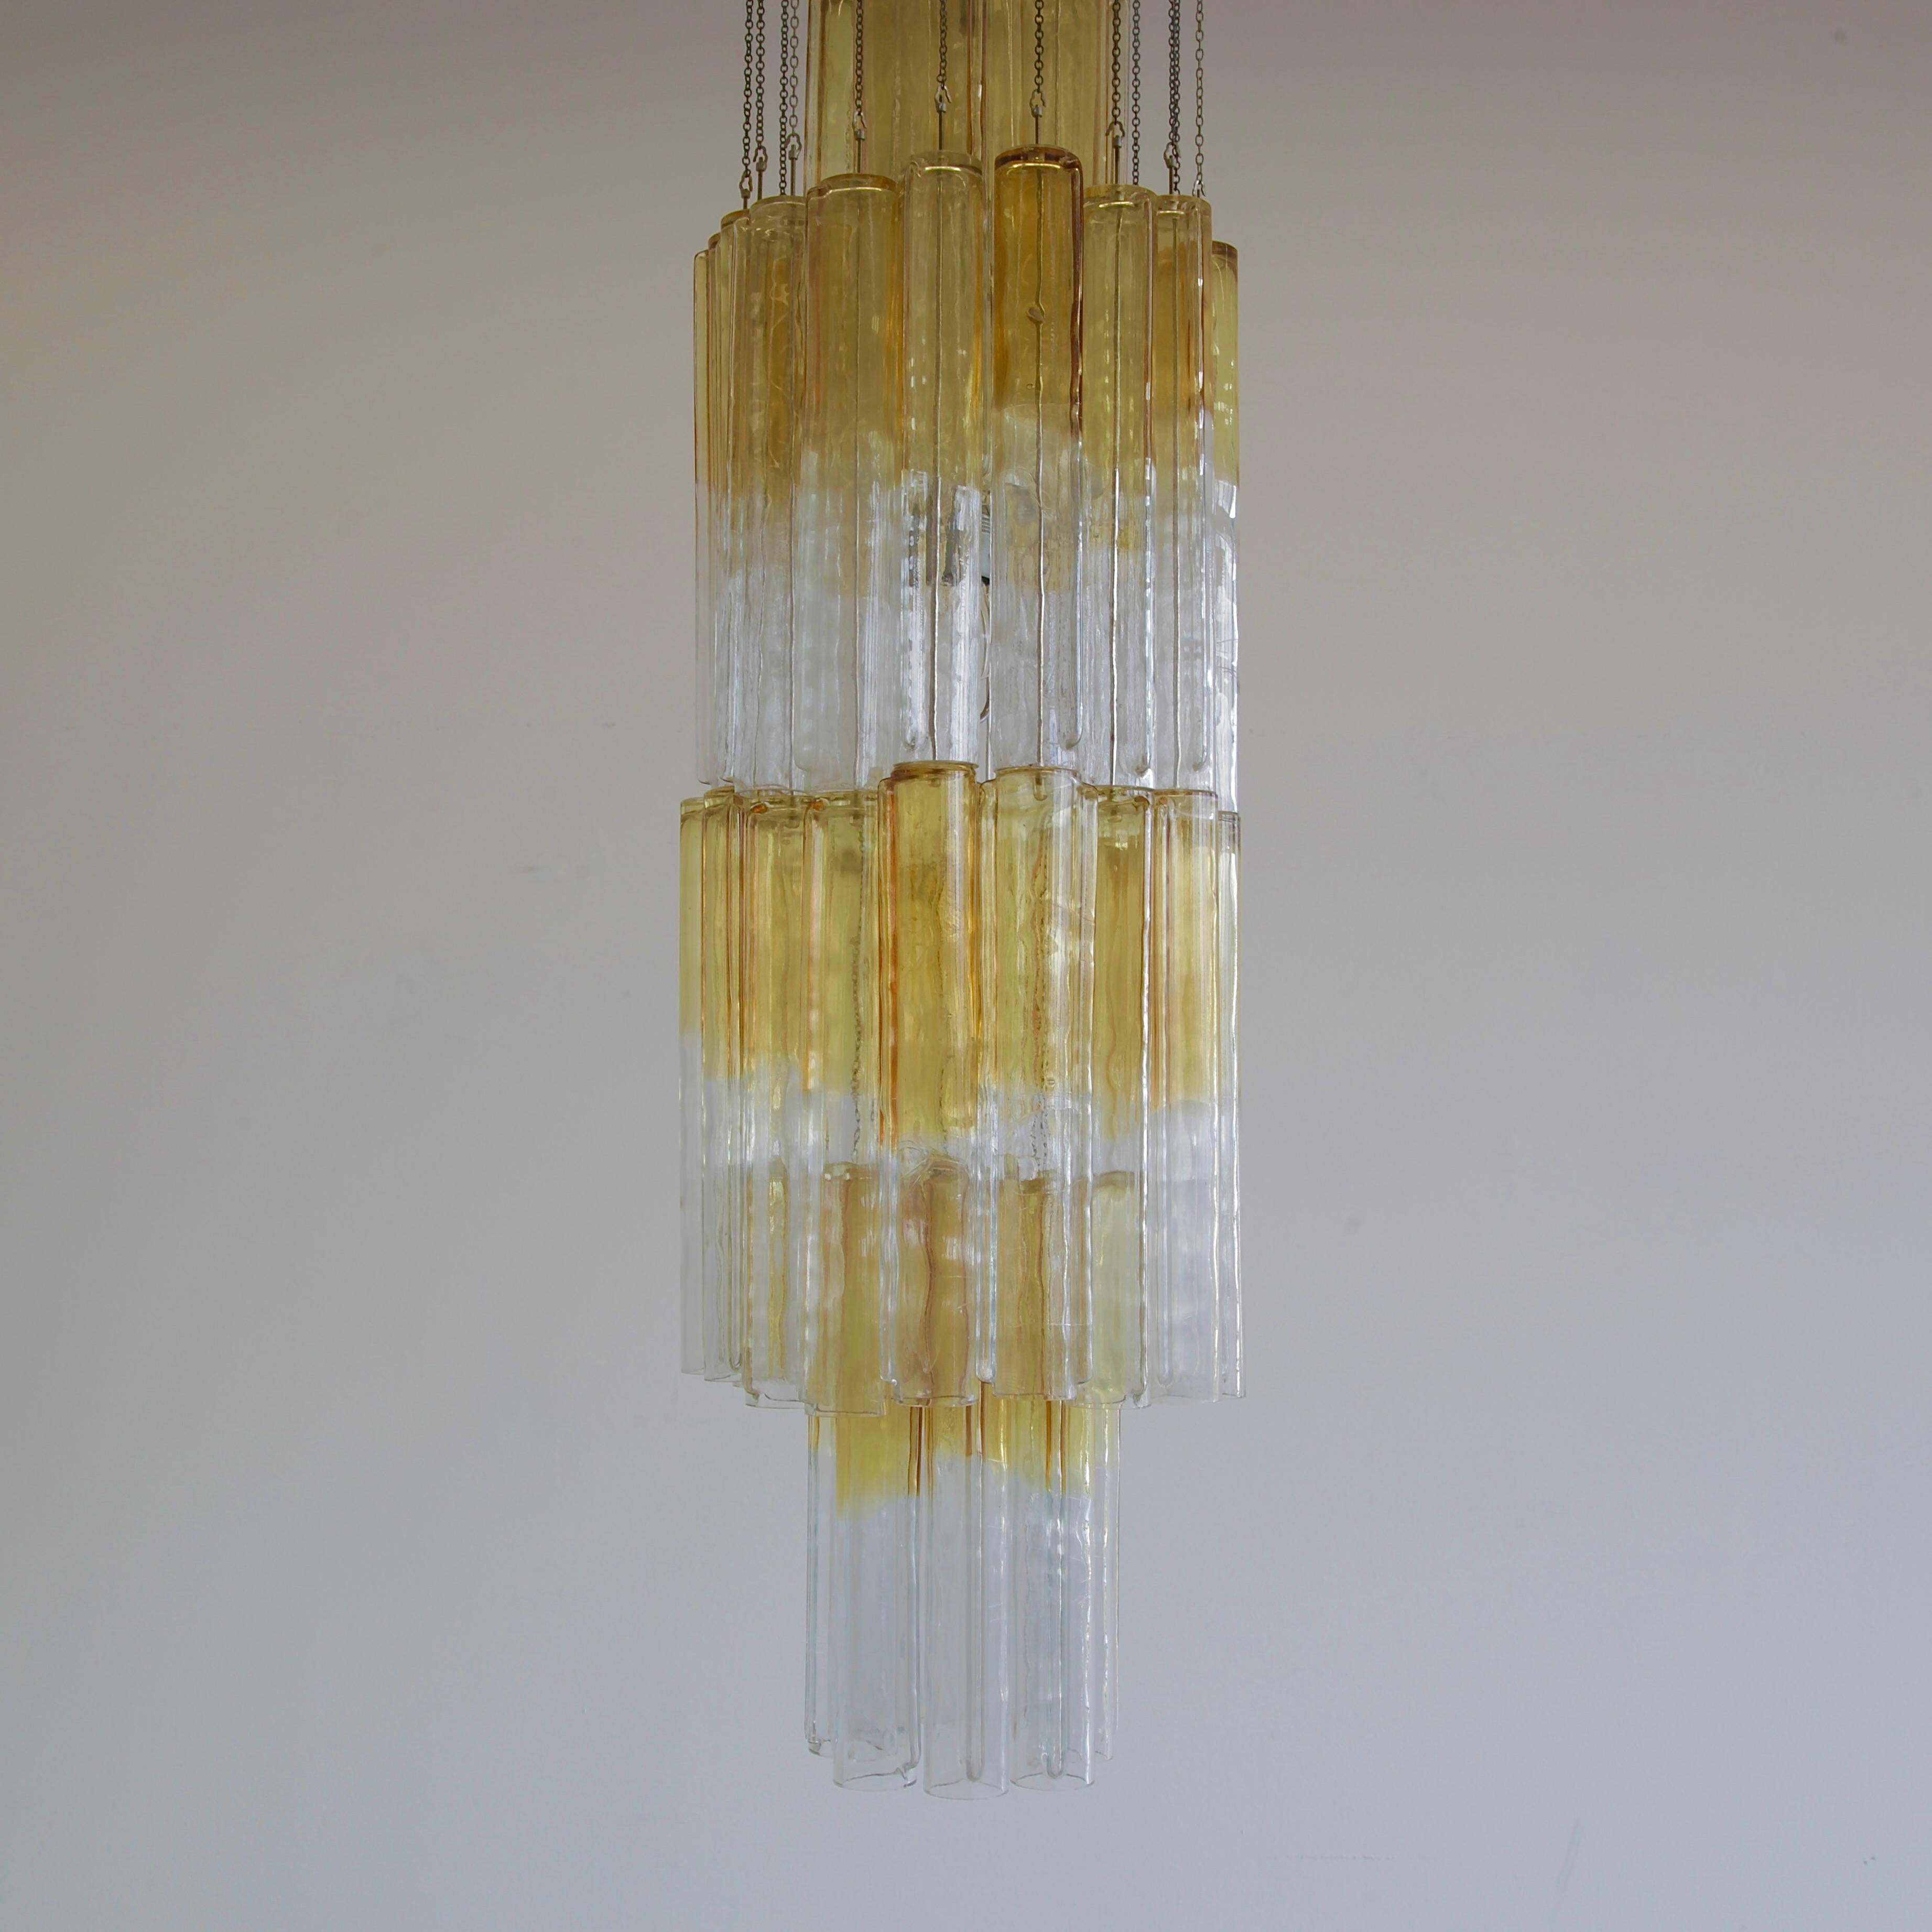 Blown Glass Large Original 'CALZA' Glass Chandelier by Venini, Italy 1960's For Sale